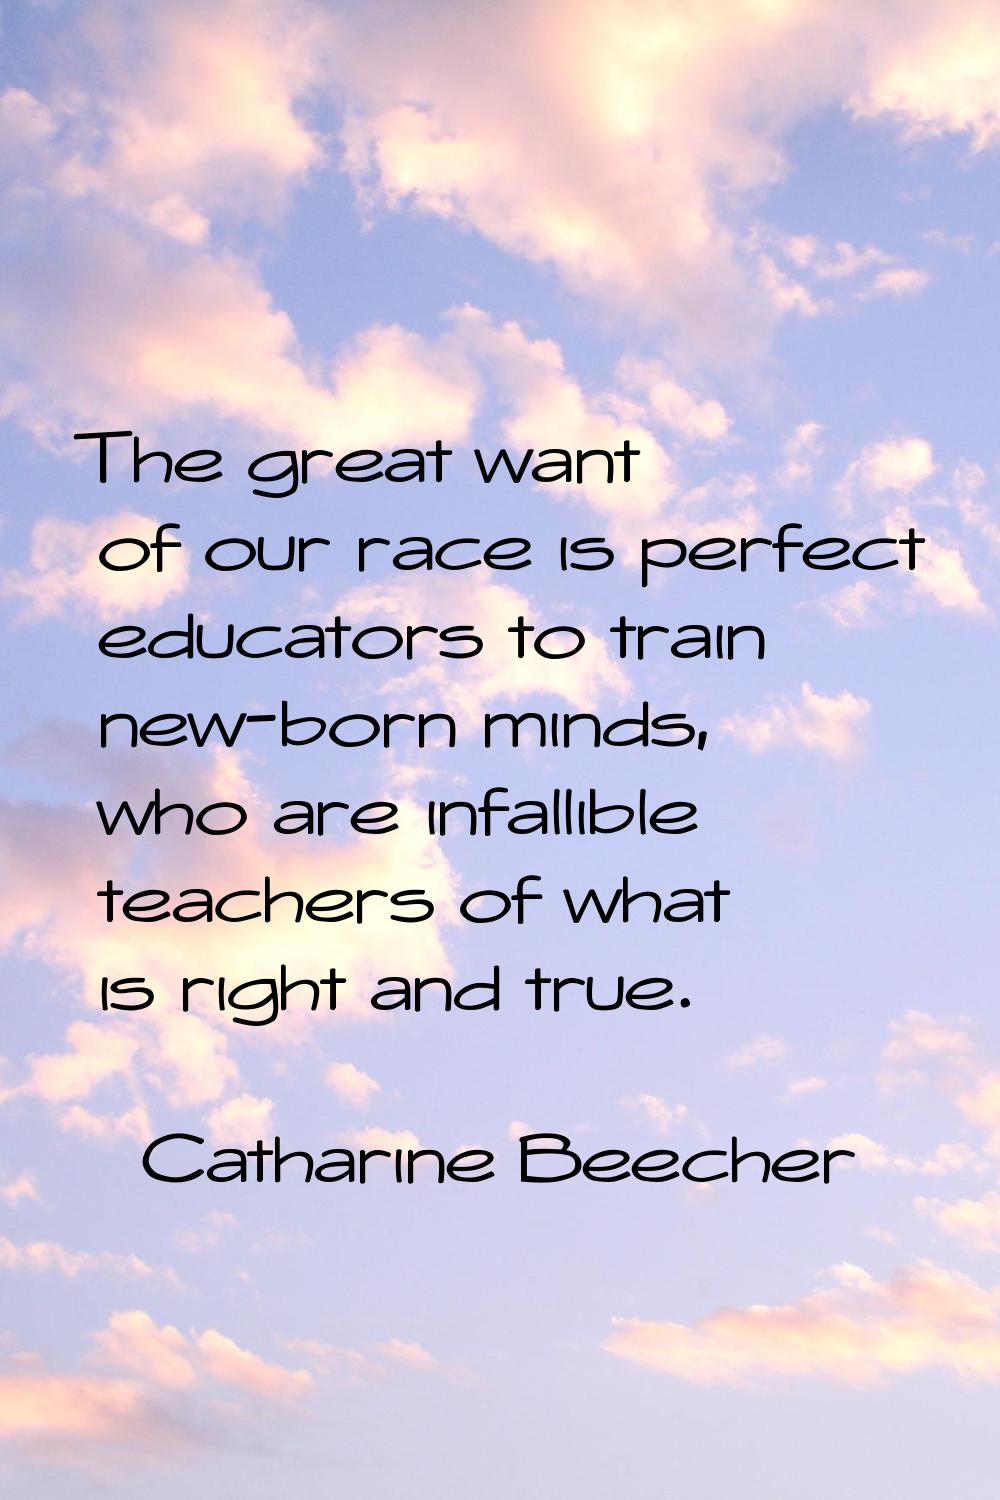 The great want of our race is perfect educators to train new-born minds, who are infallible teacher